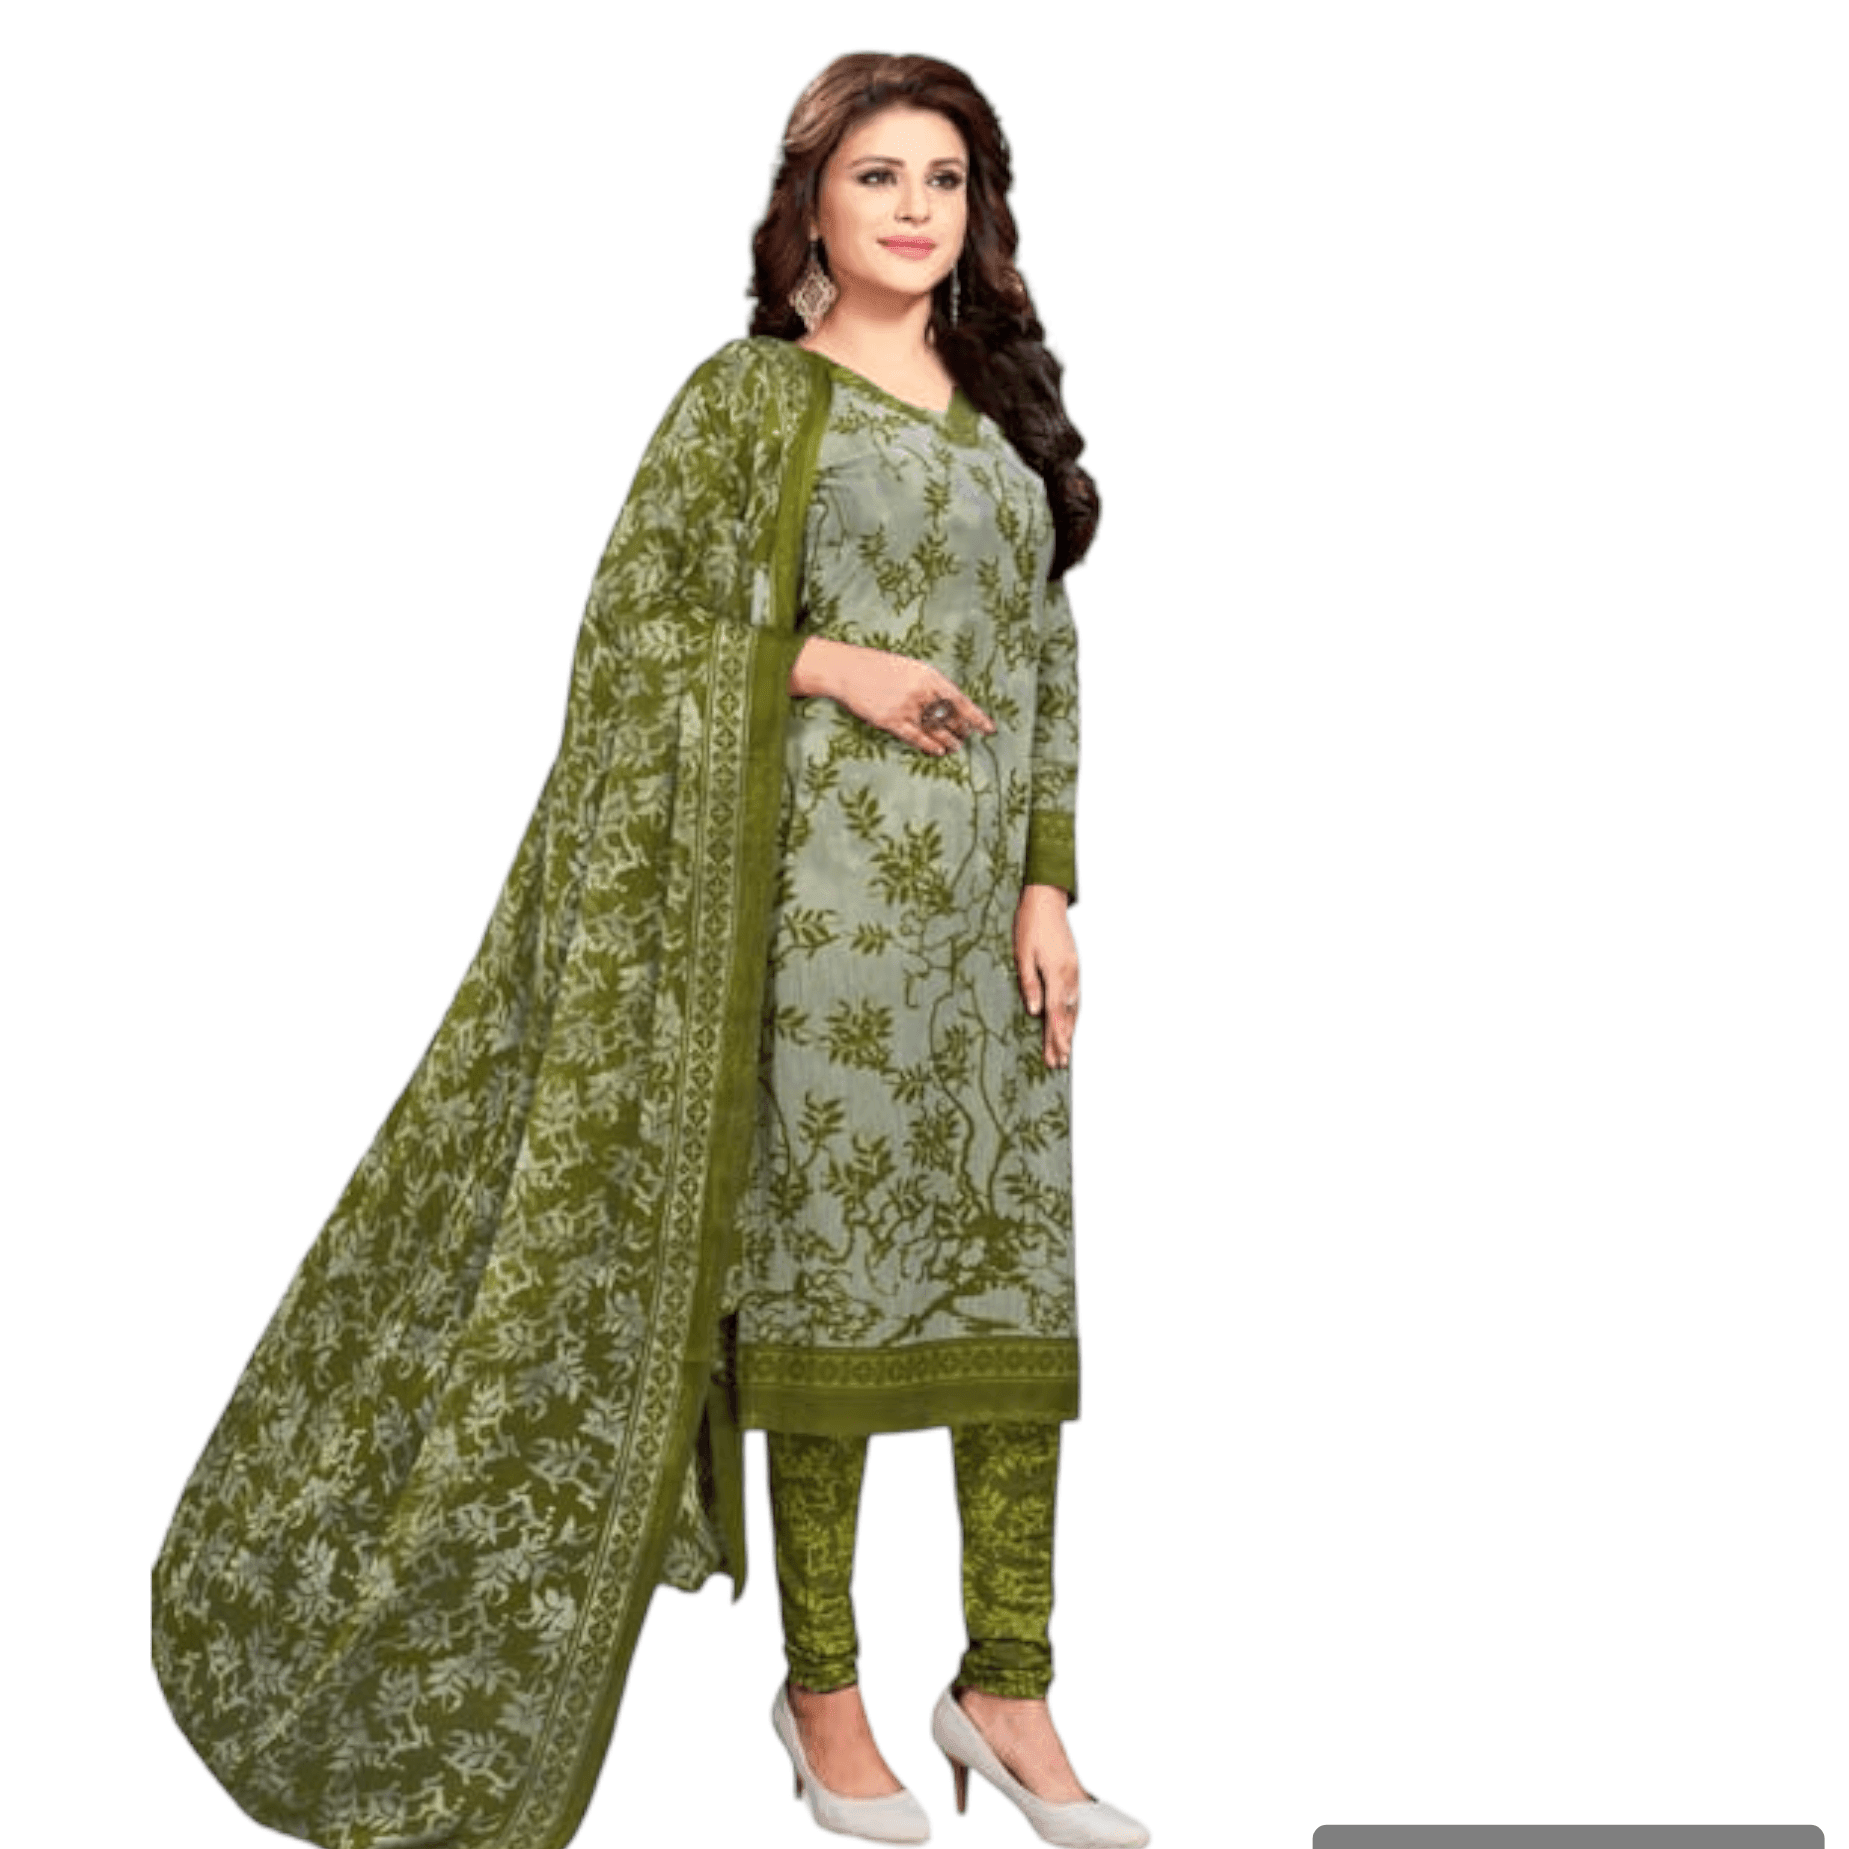 Gery Olive Top and Natural Green Patiala Pant Unstitched Salwar Kameez with Dupatta - Bavis Clothing